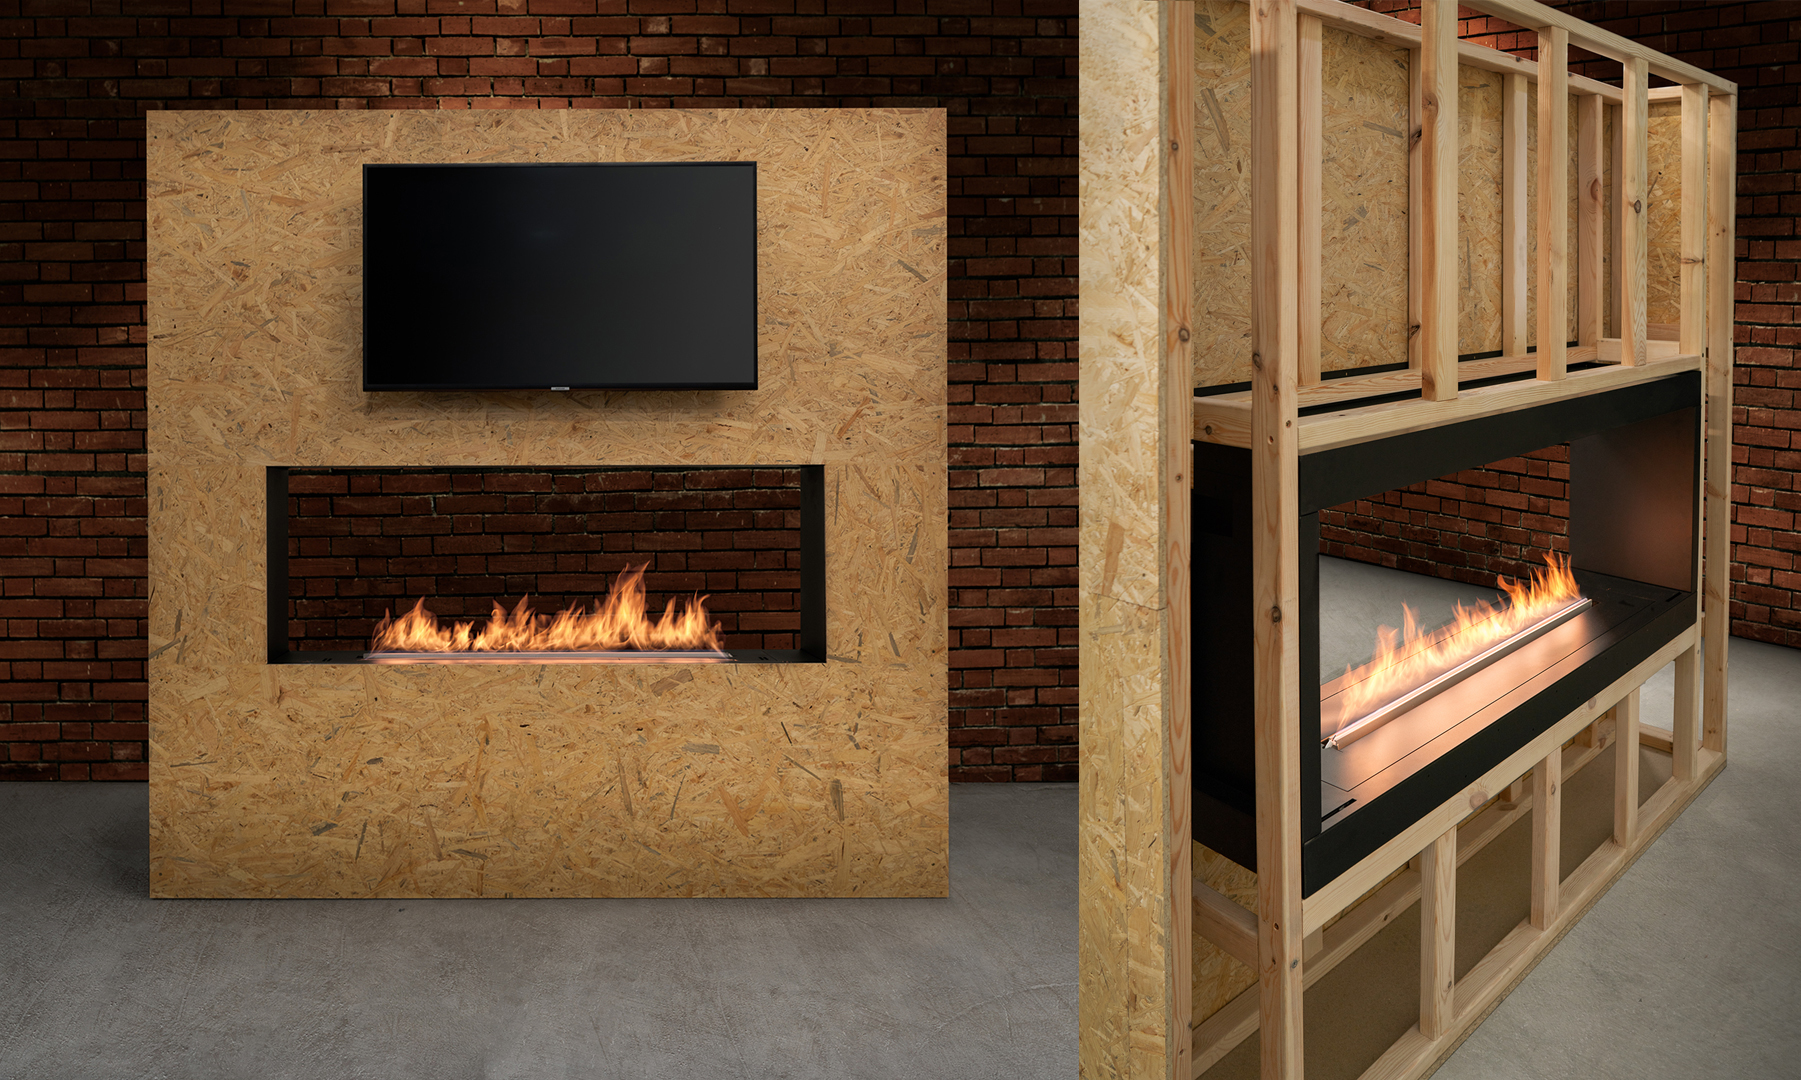 TV installed above an ethanol fireplace on a wall made of combustible materials.